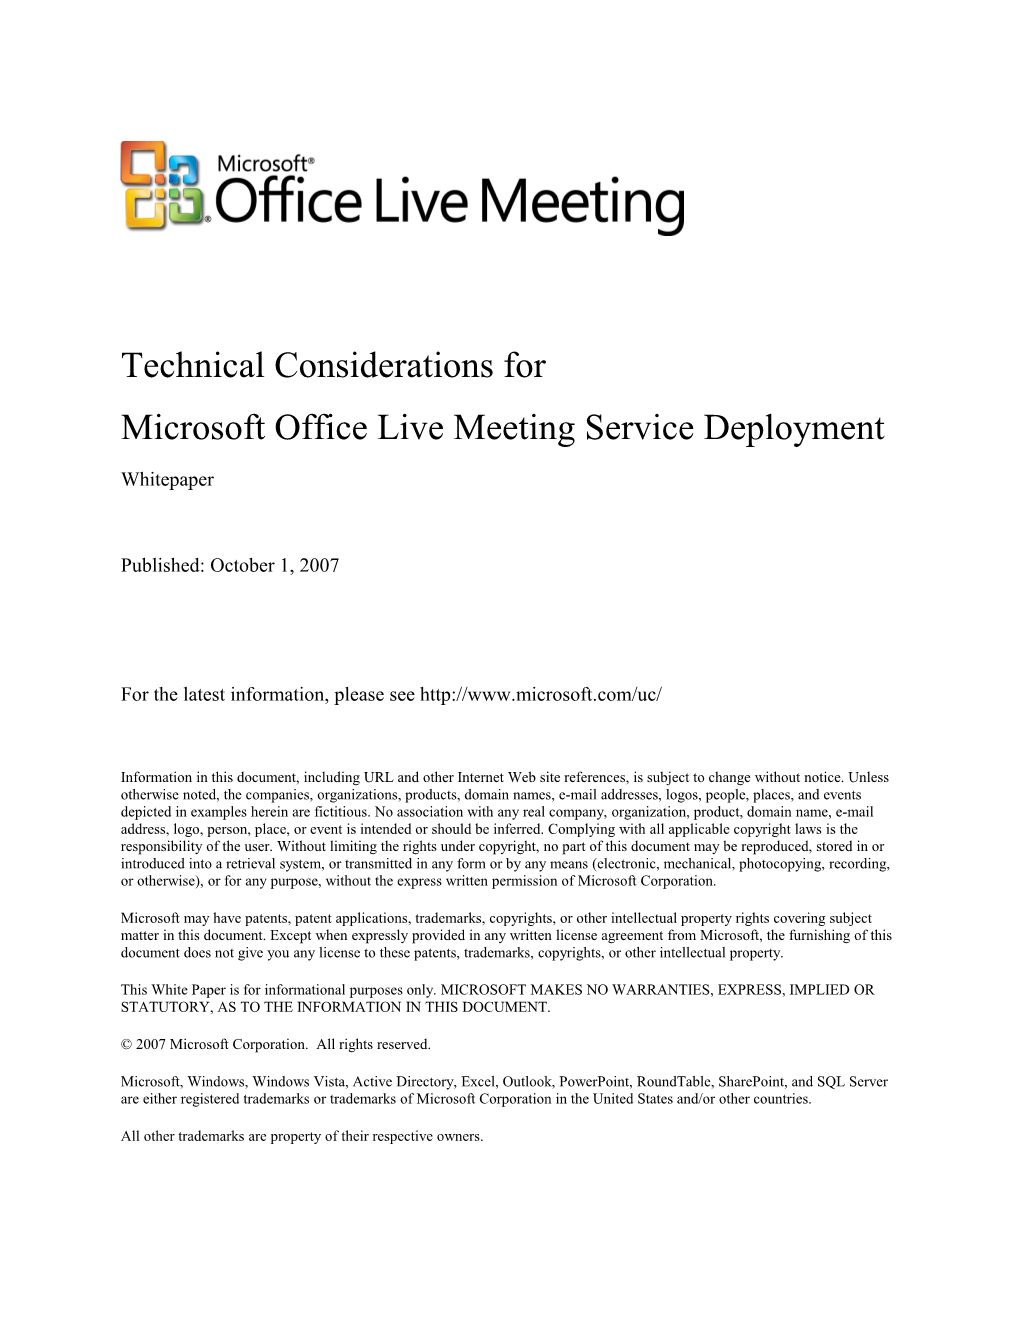 Microsoft Office Live Meeting Service Deployment